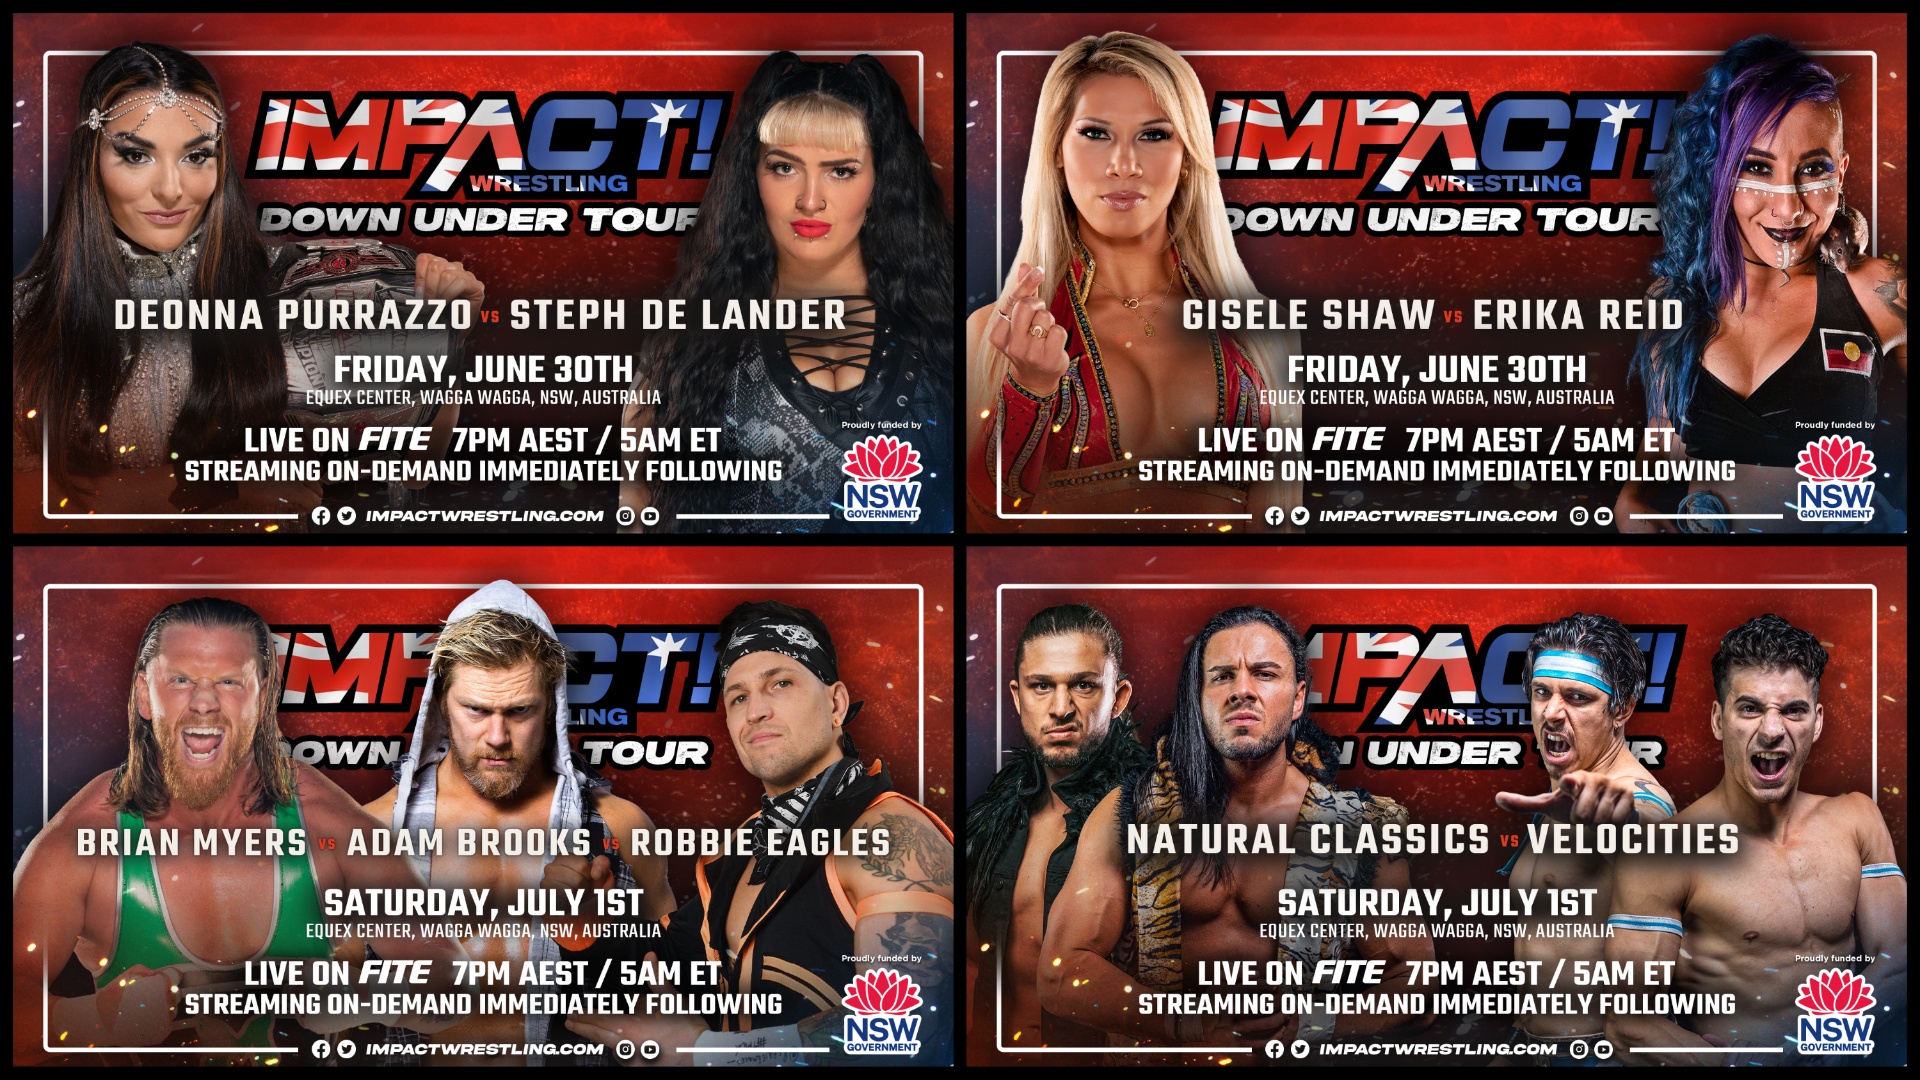 Top Australian Talent Set for Action This Friday & Saturday at the IMPACT Wrestling Down Under Tour